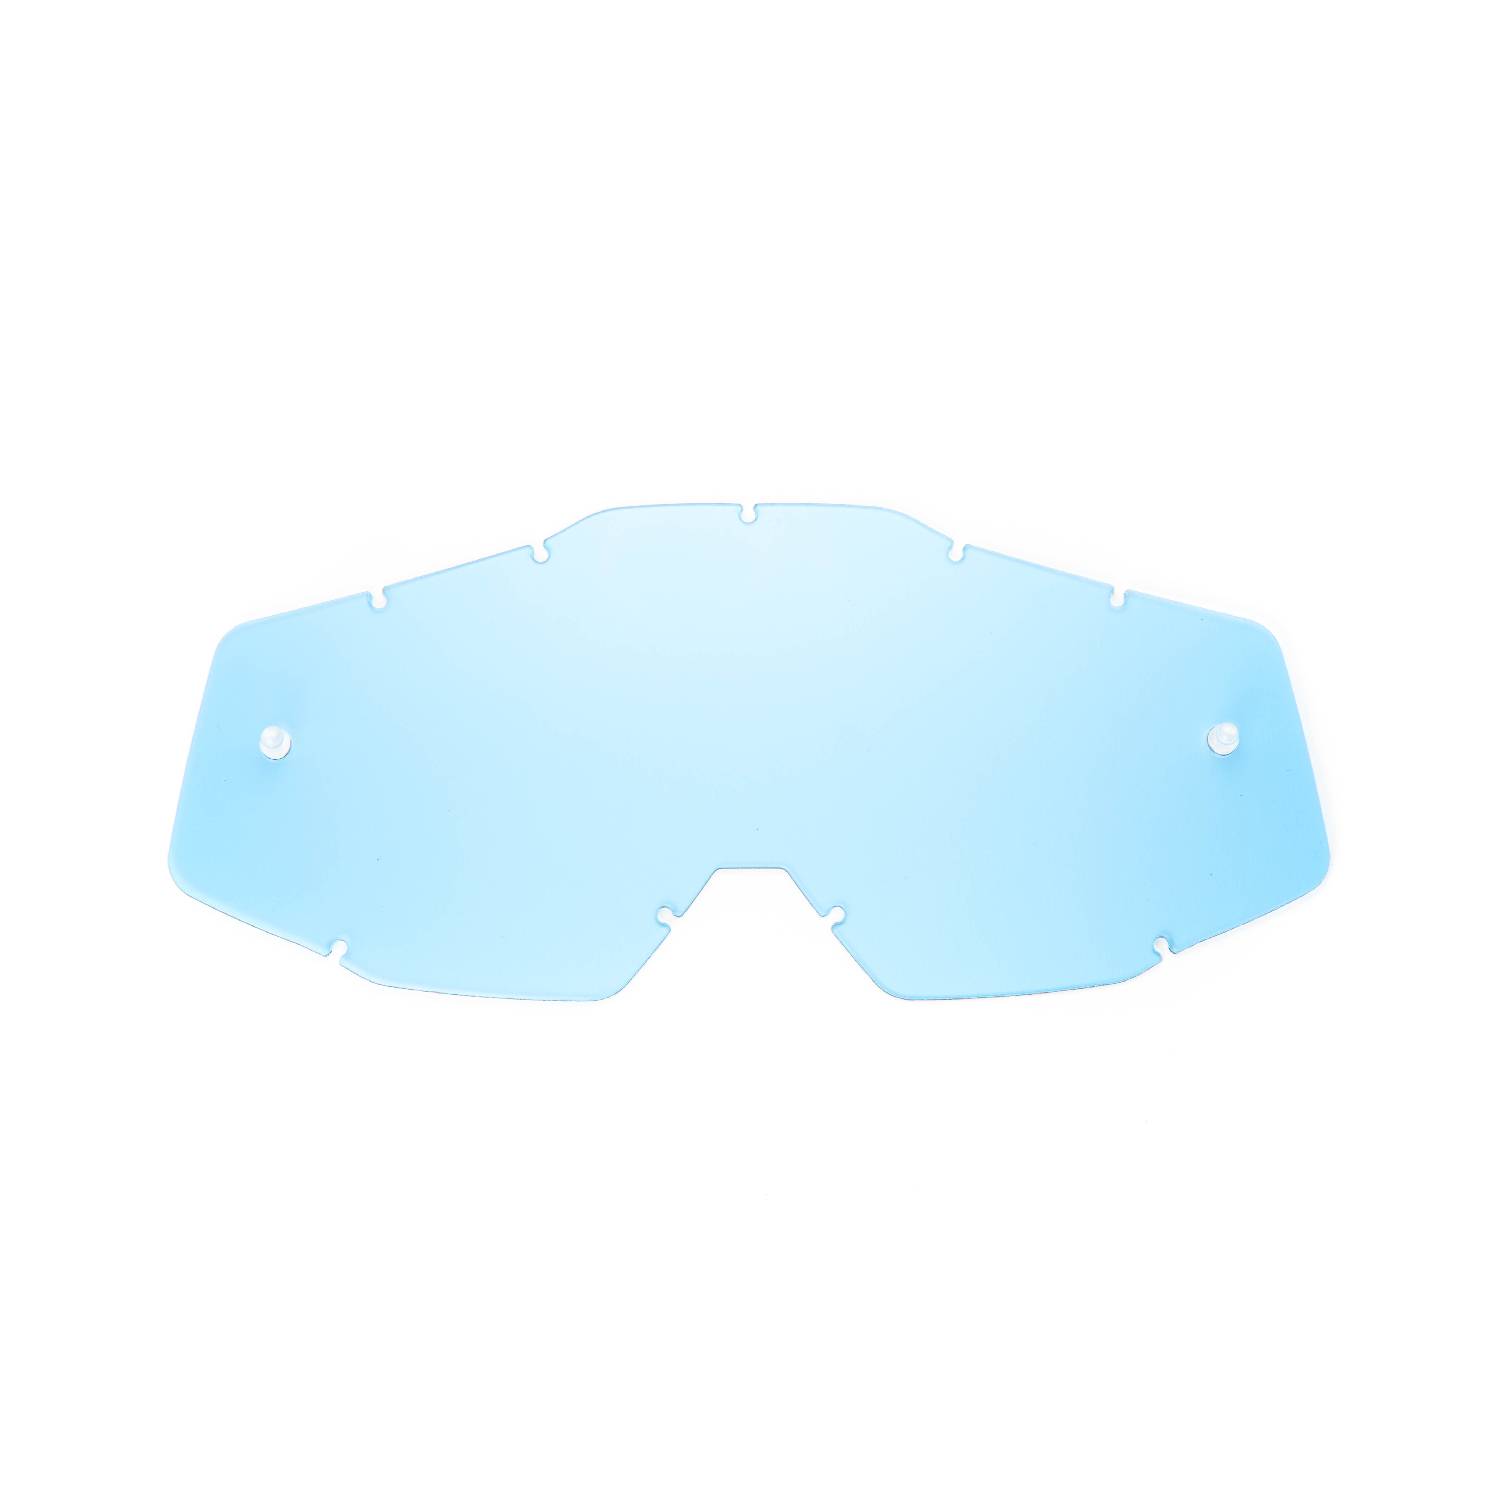 blue replacement lenses for goggles compatible for FMF POWERBOMB/POWERCORE goggle